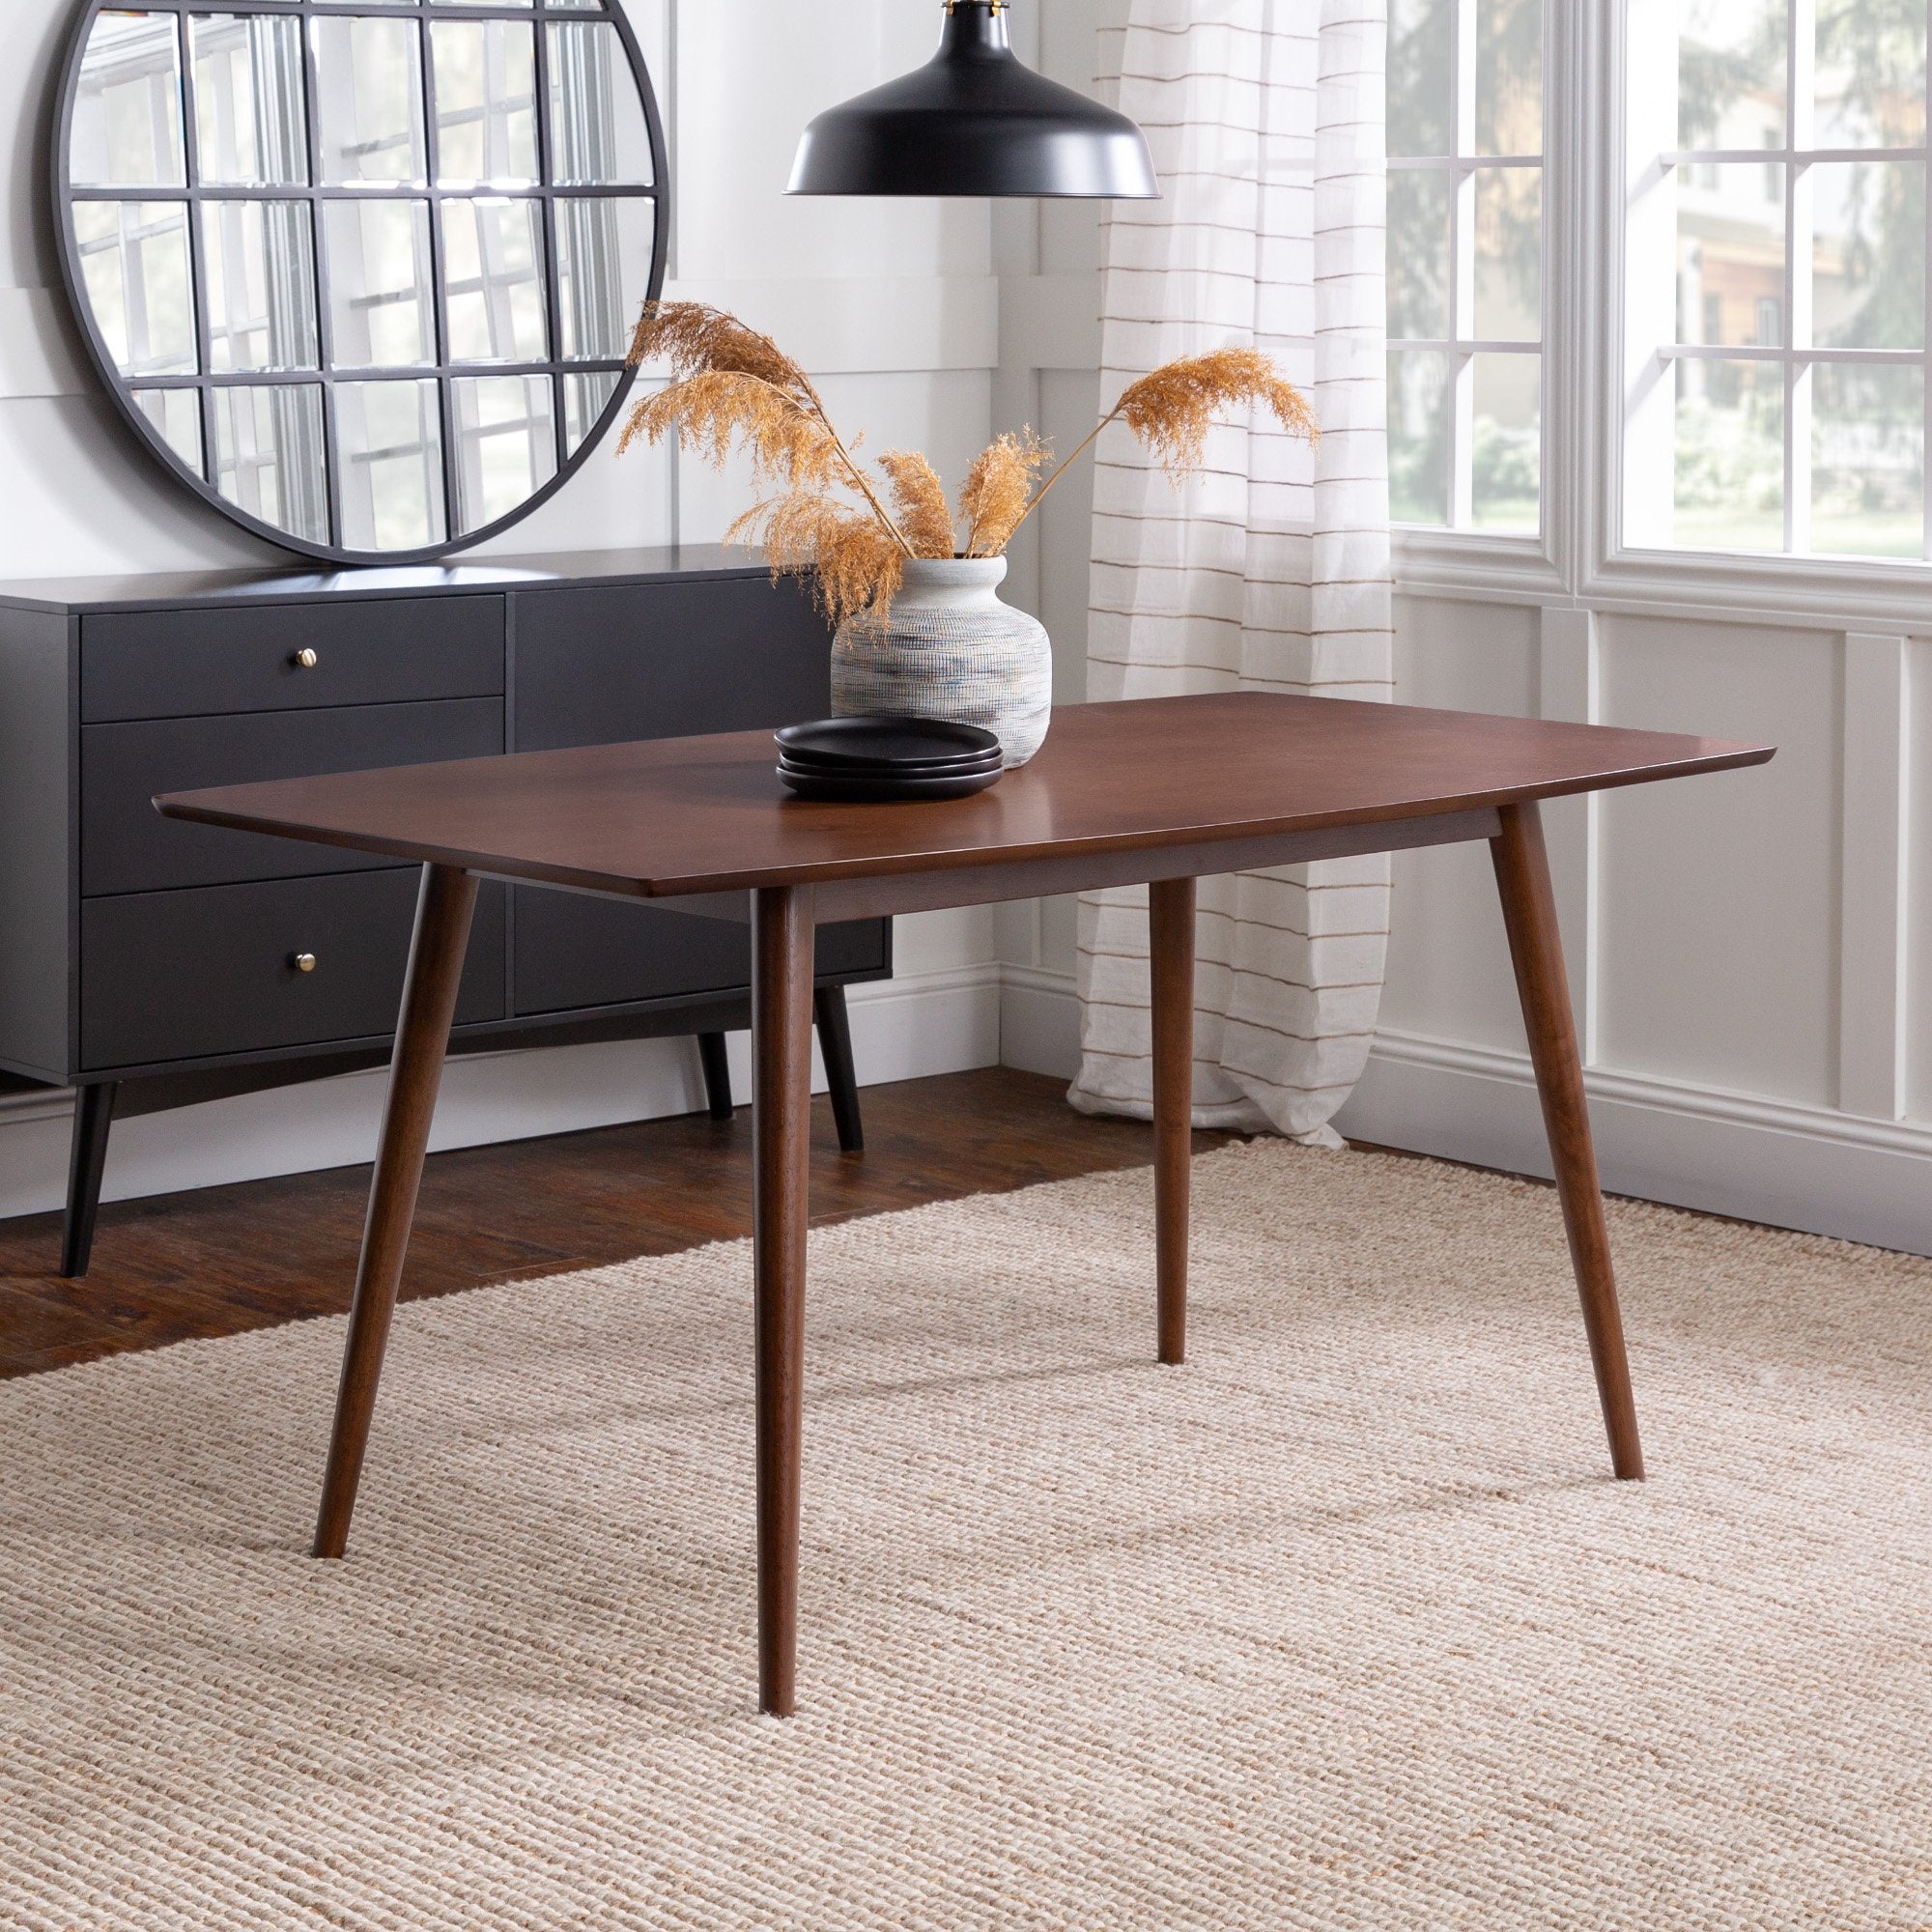 contemporary dining room table sets